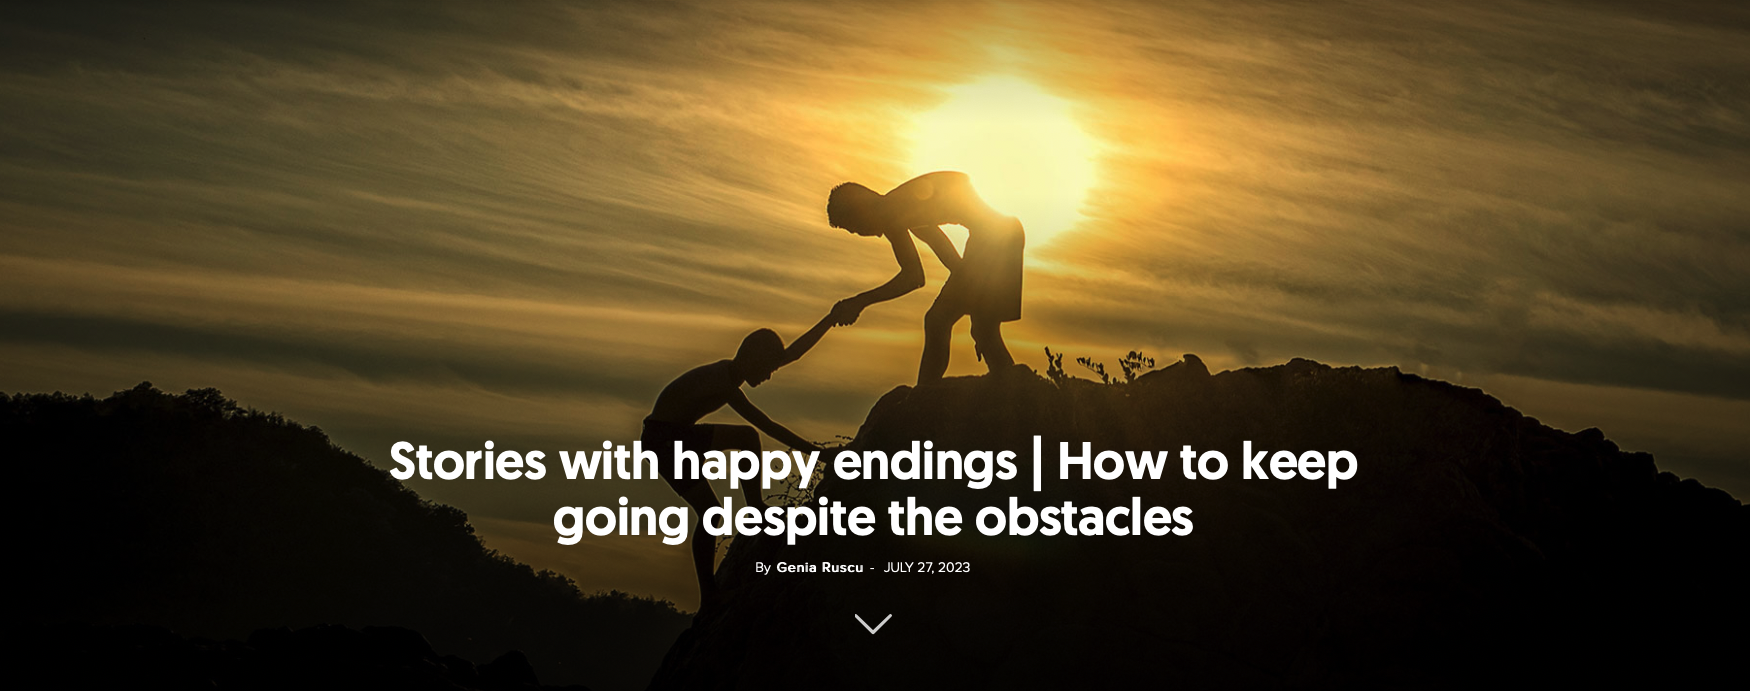 How to cherish the obstacles in your life